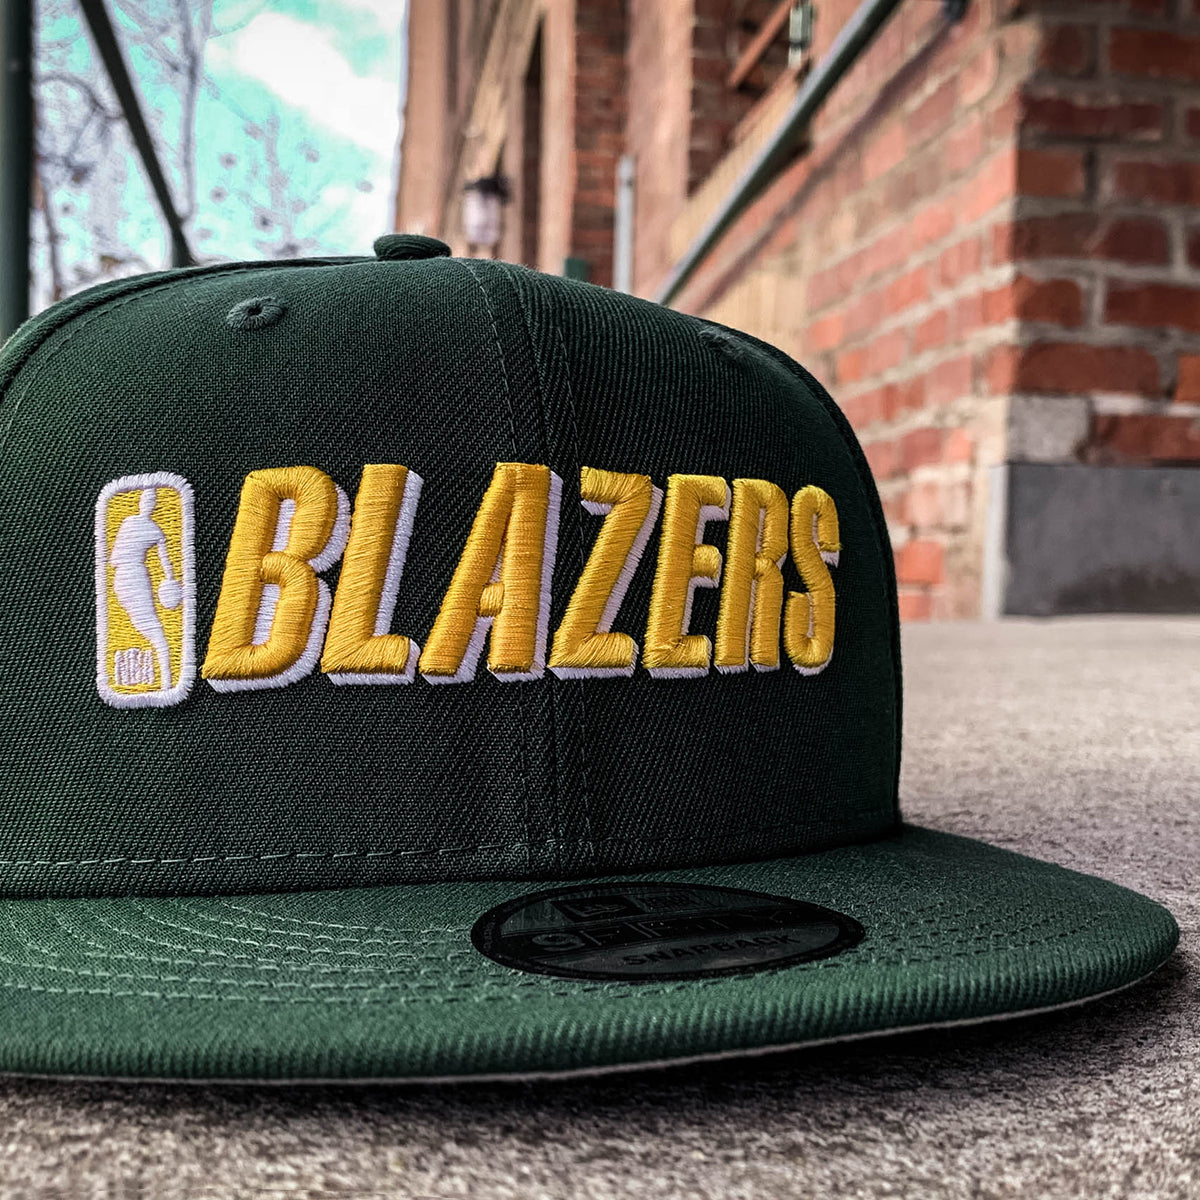 Green cap with embroidered gold NBA BLAZERS logo on the crown sitting outdoors on the street.